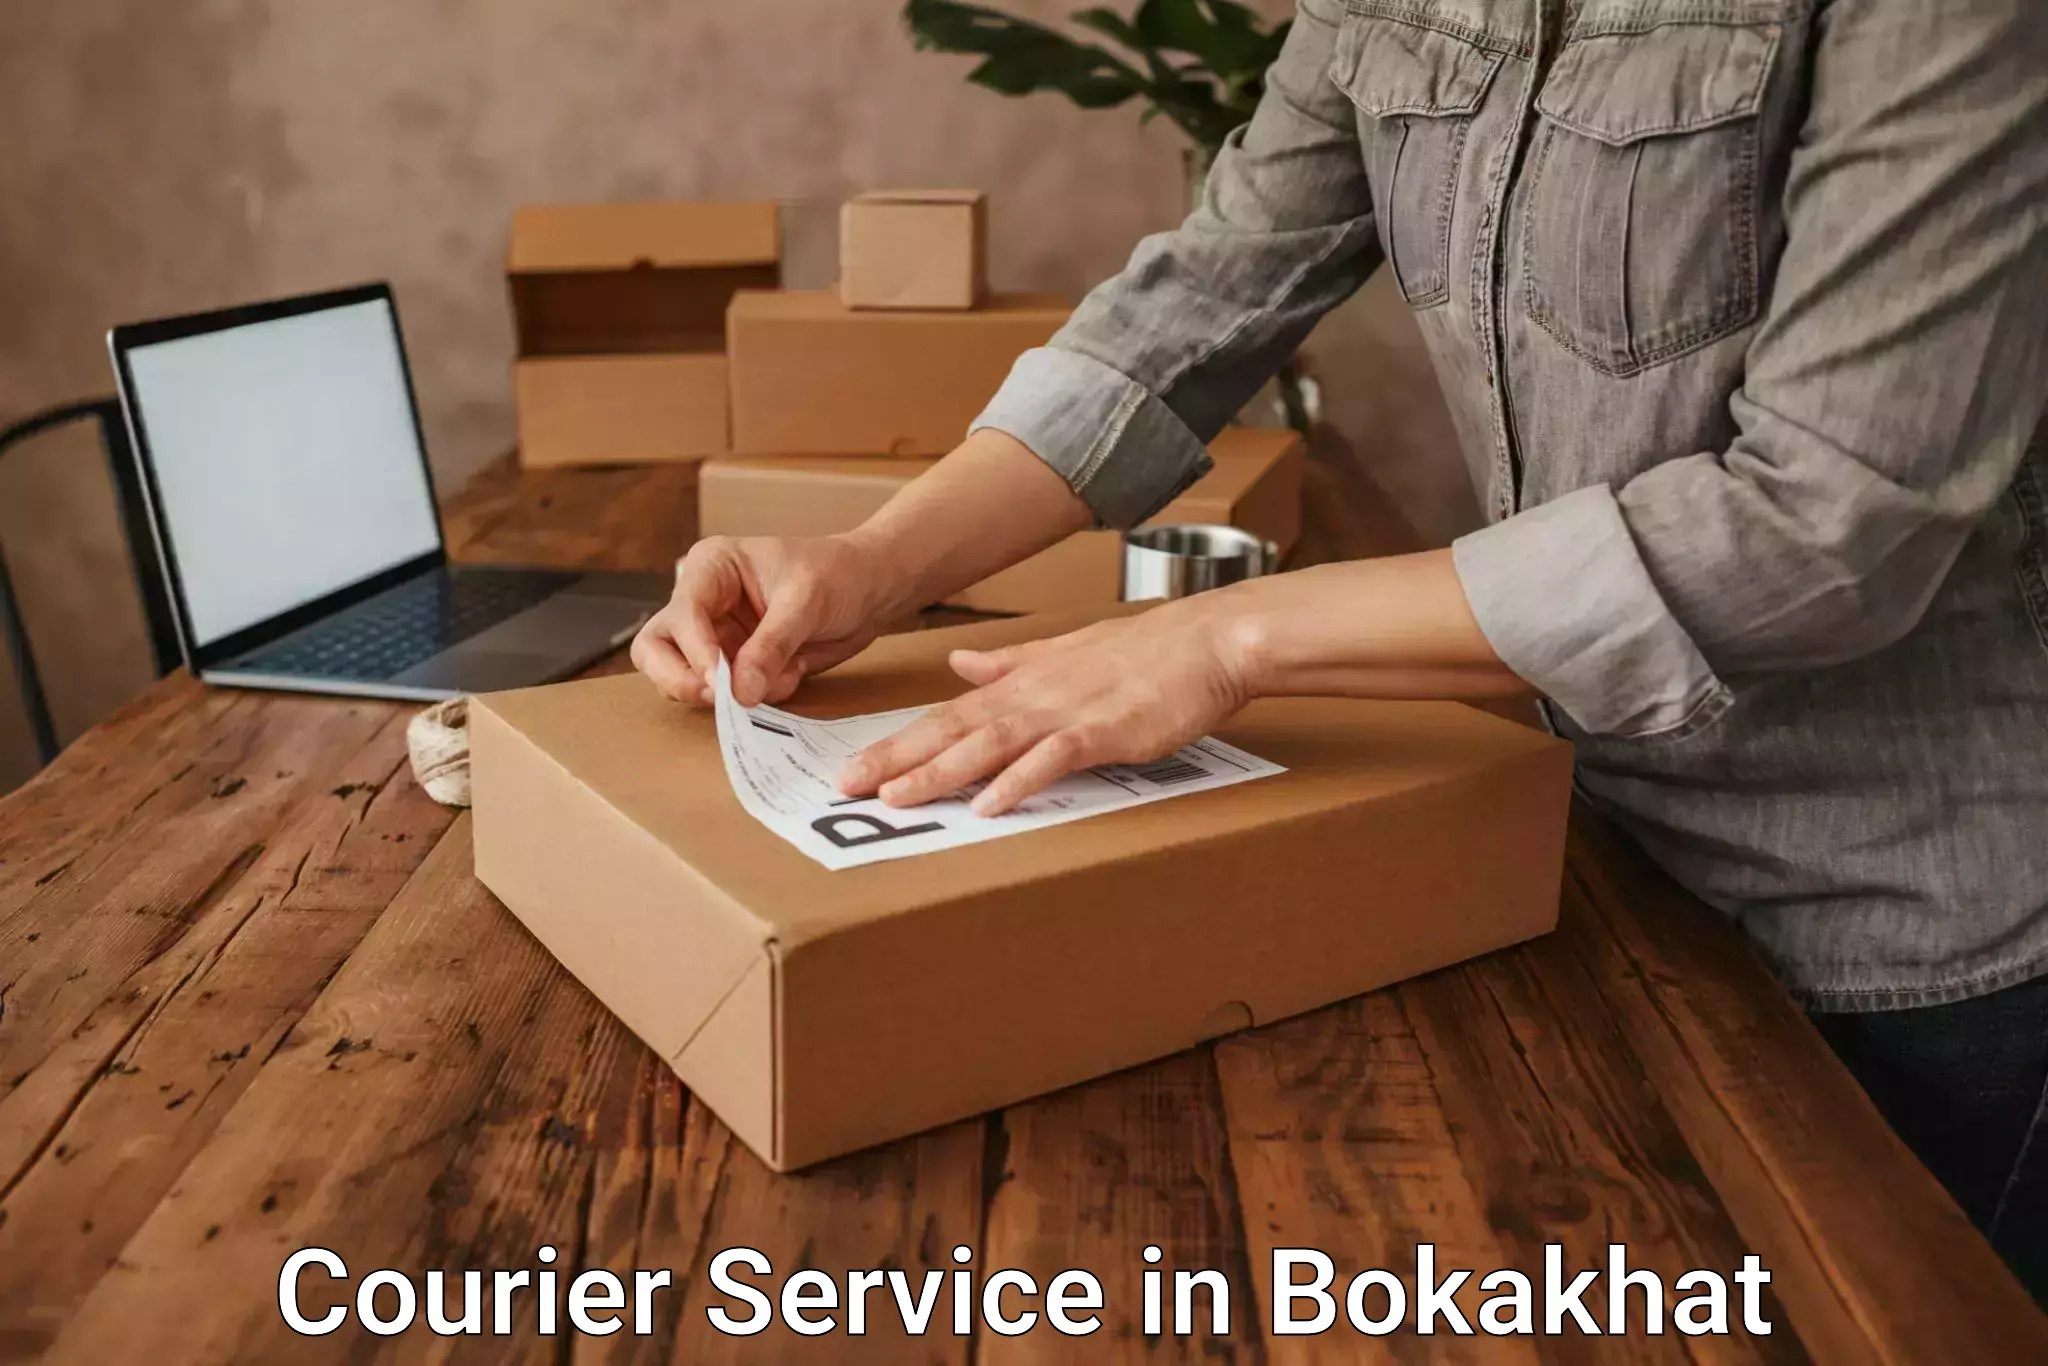 Sustainable courier practices in Bokakhat